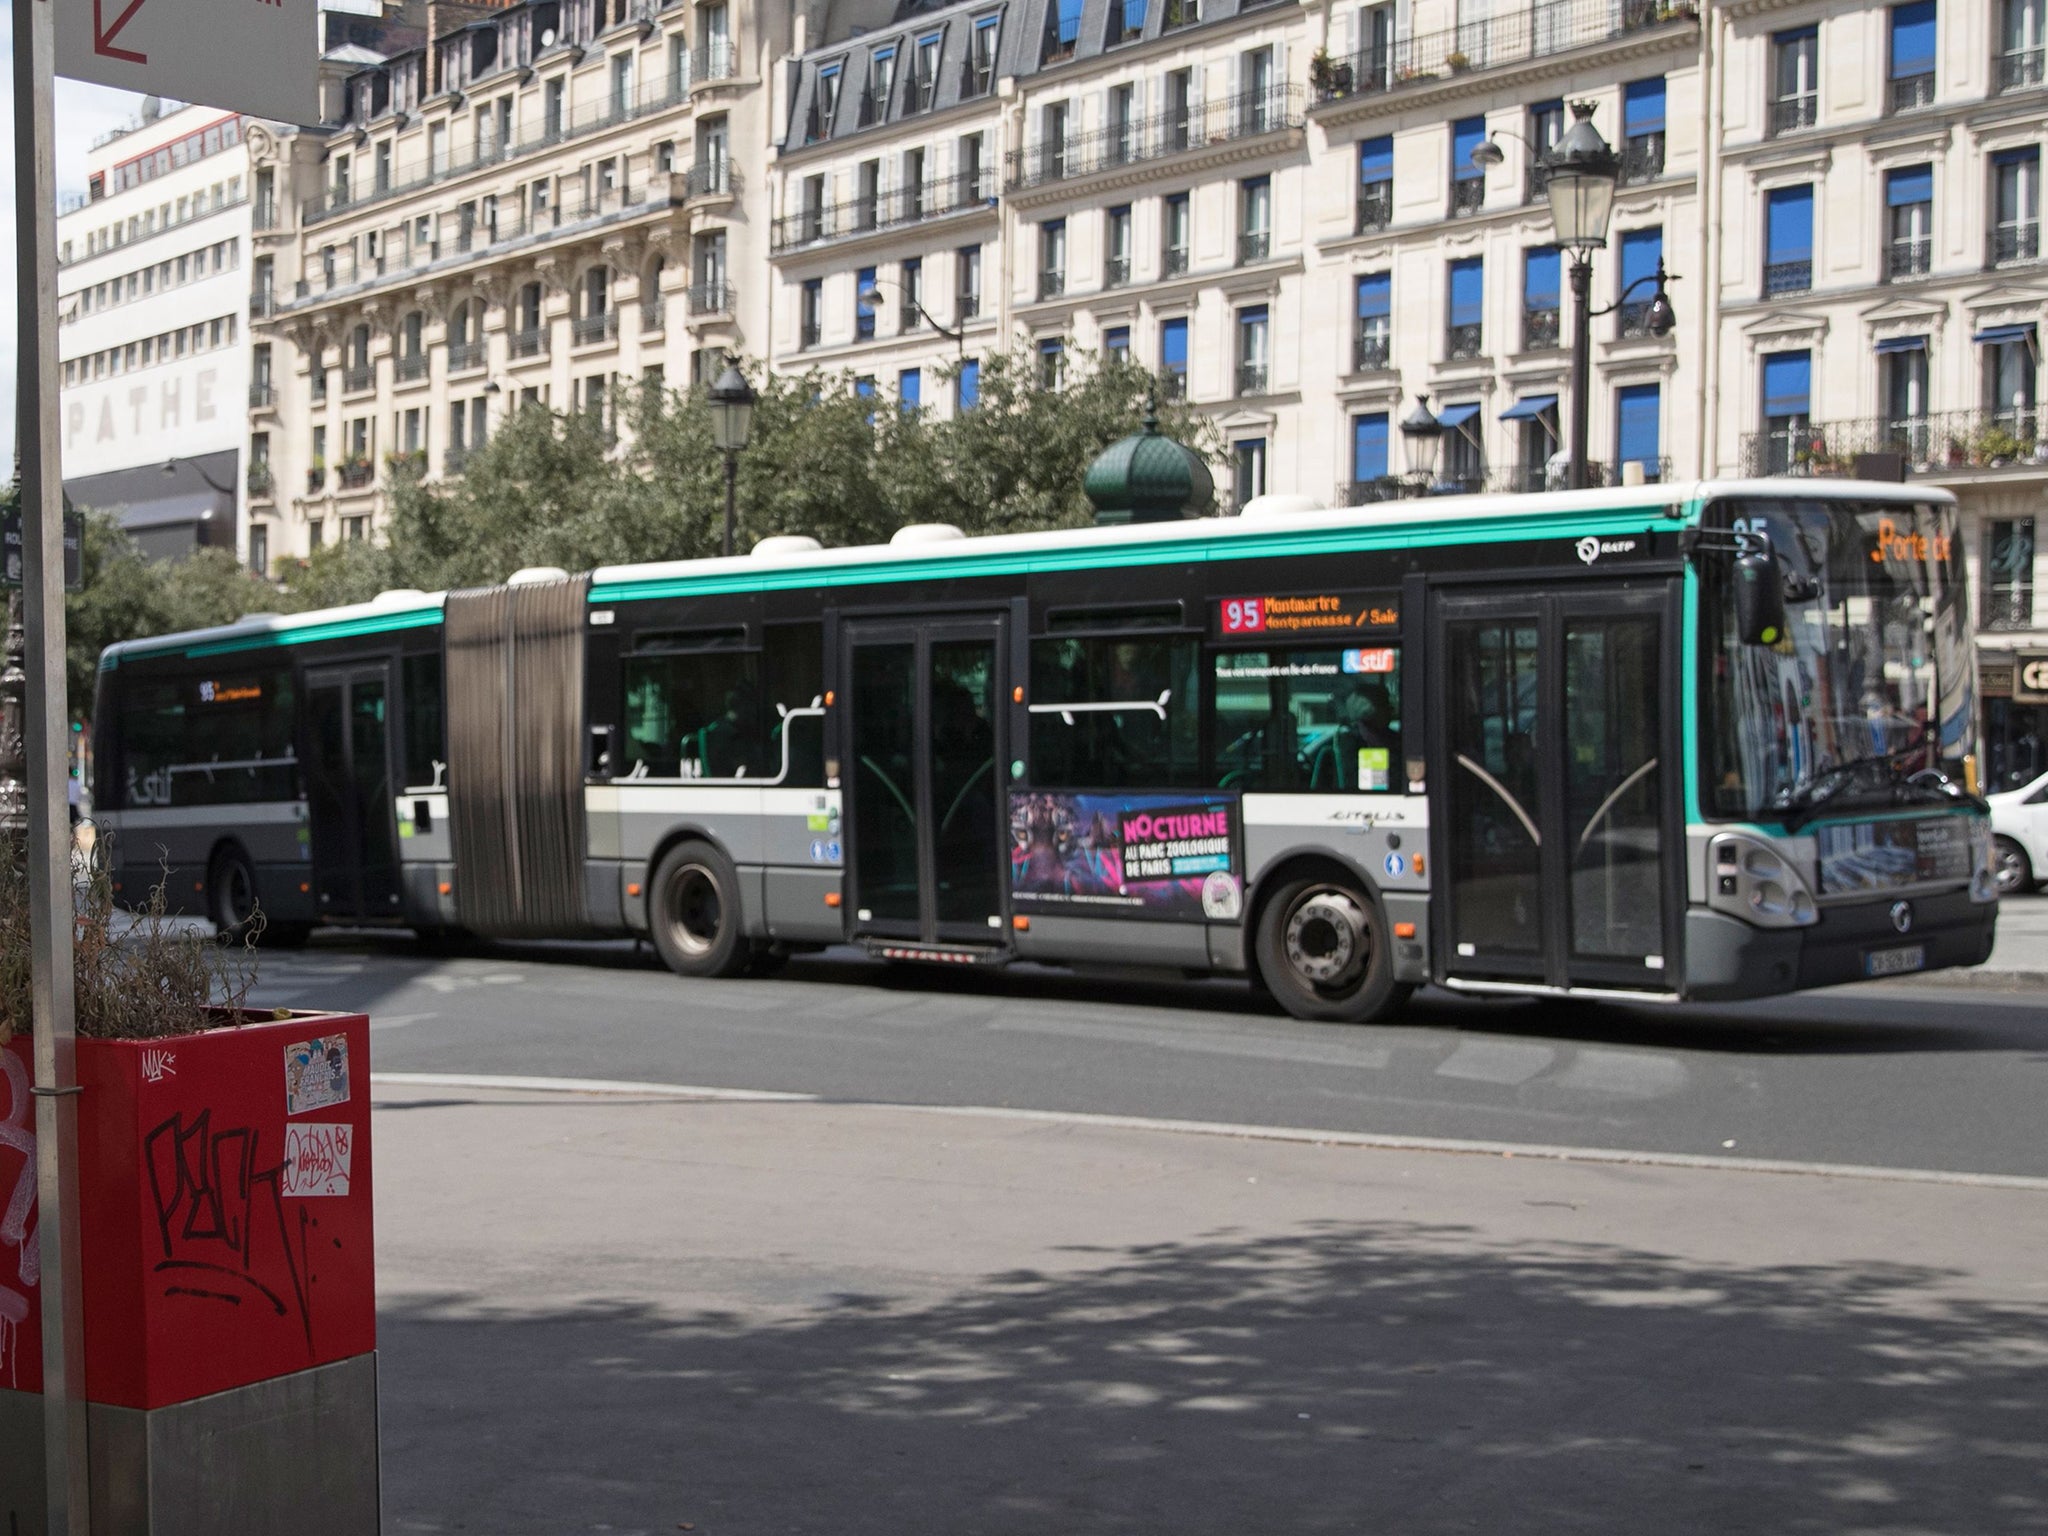 The man was inebriated when he boarded a bus near Paris smacked the 21-year-old on the buttocks and made an insulting comment